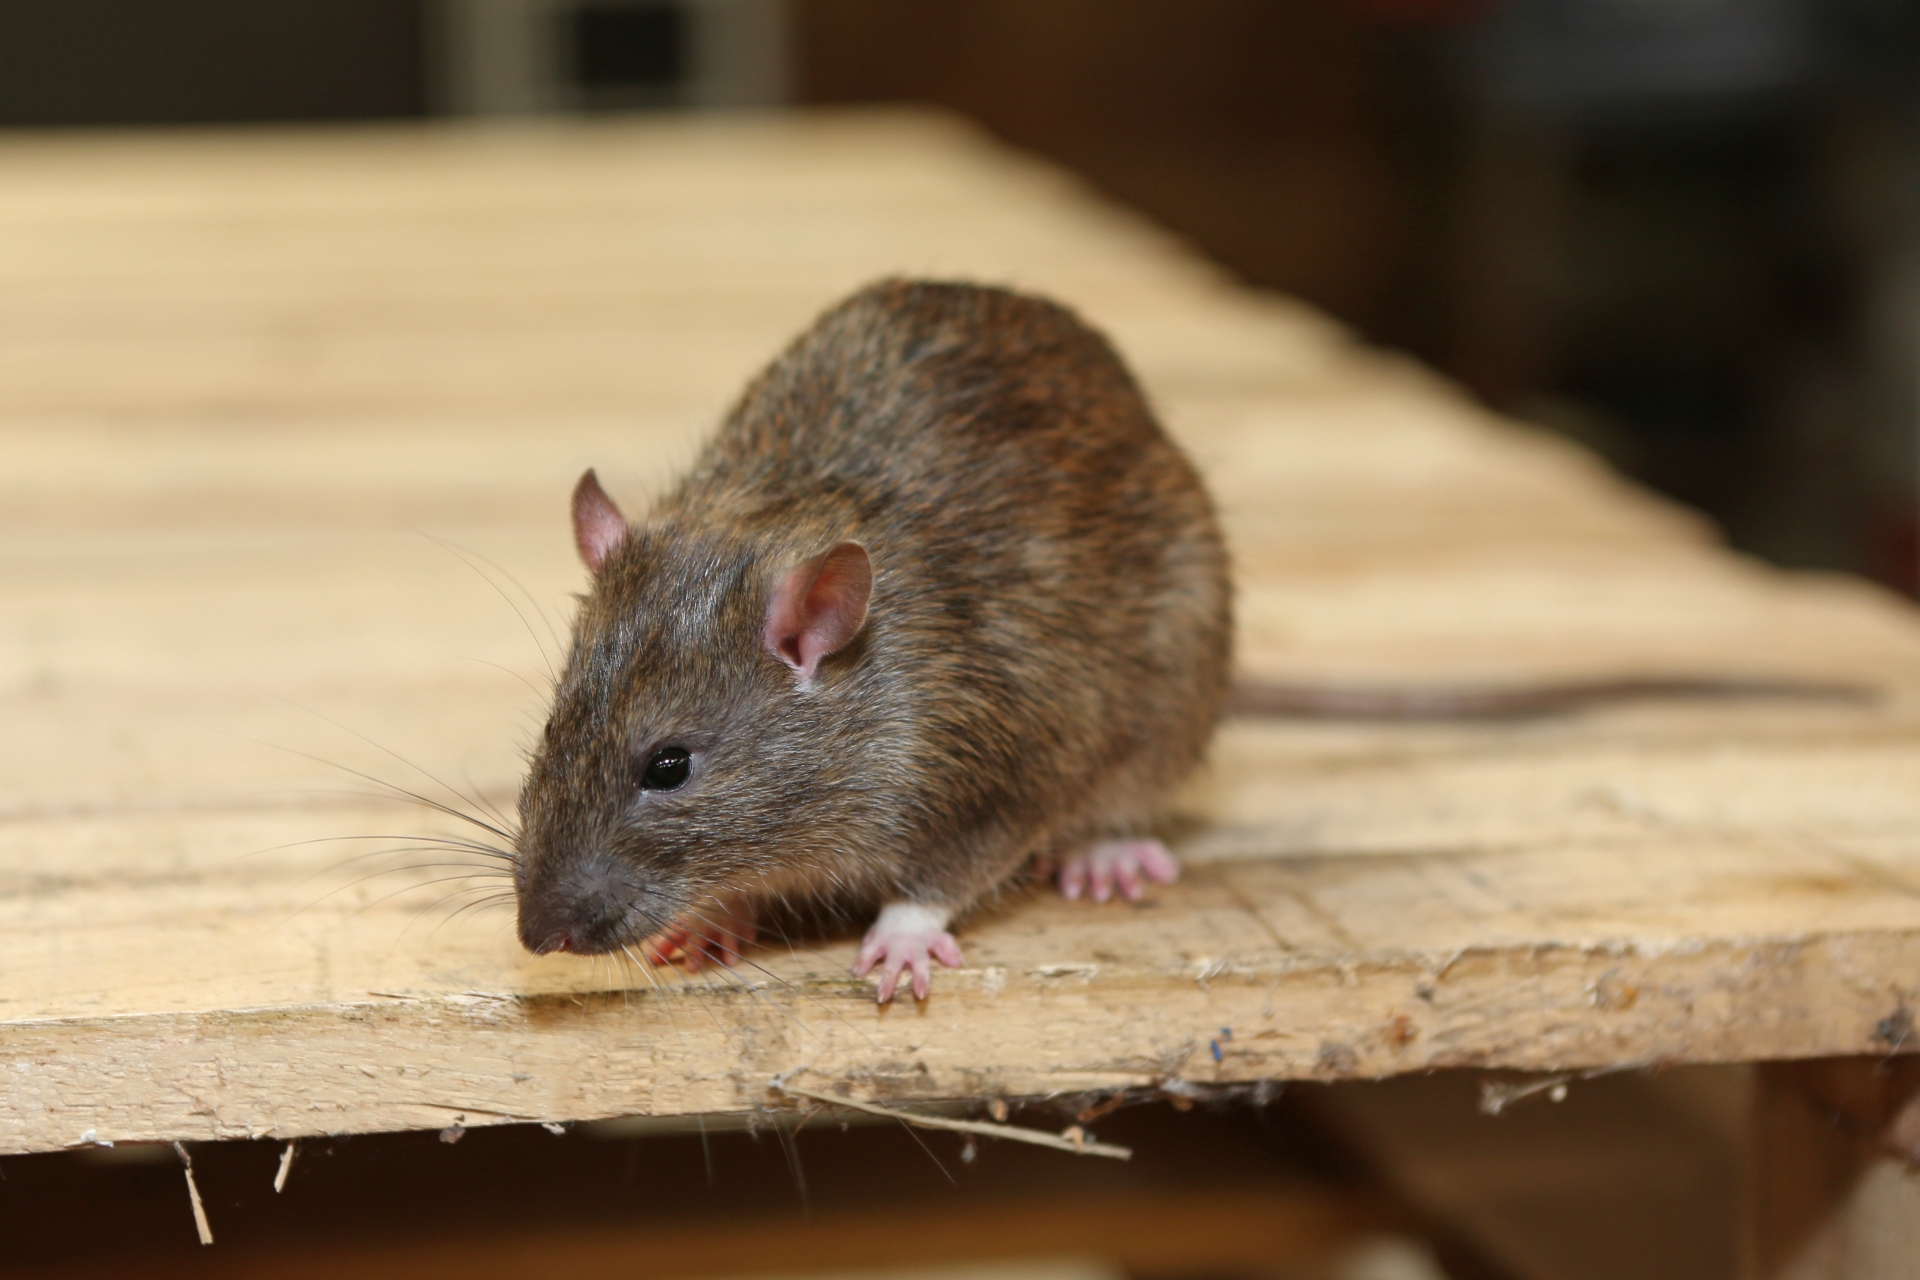 Rat extermination, Pest Control in Purley, Kenley, CR8. Call Now 020 8166 9746